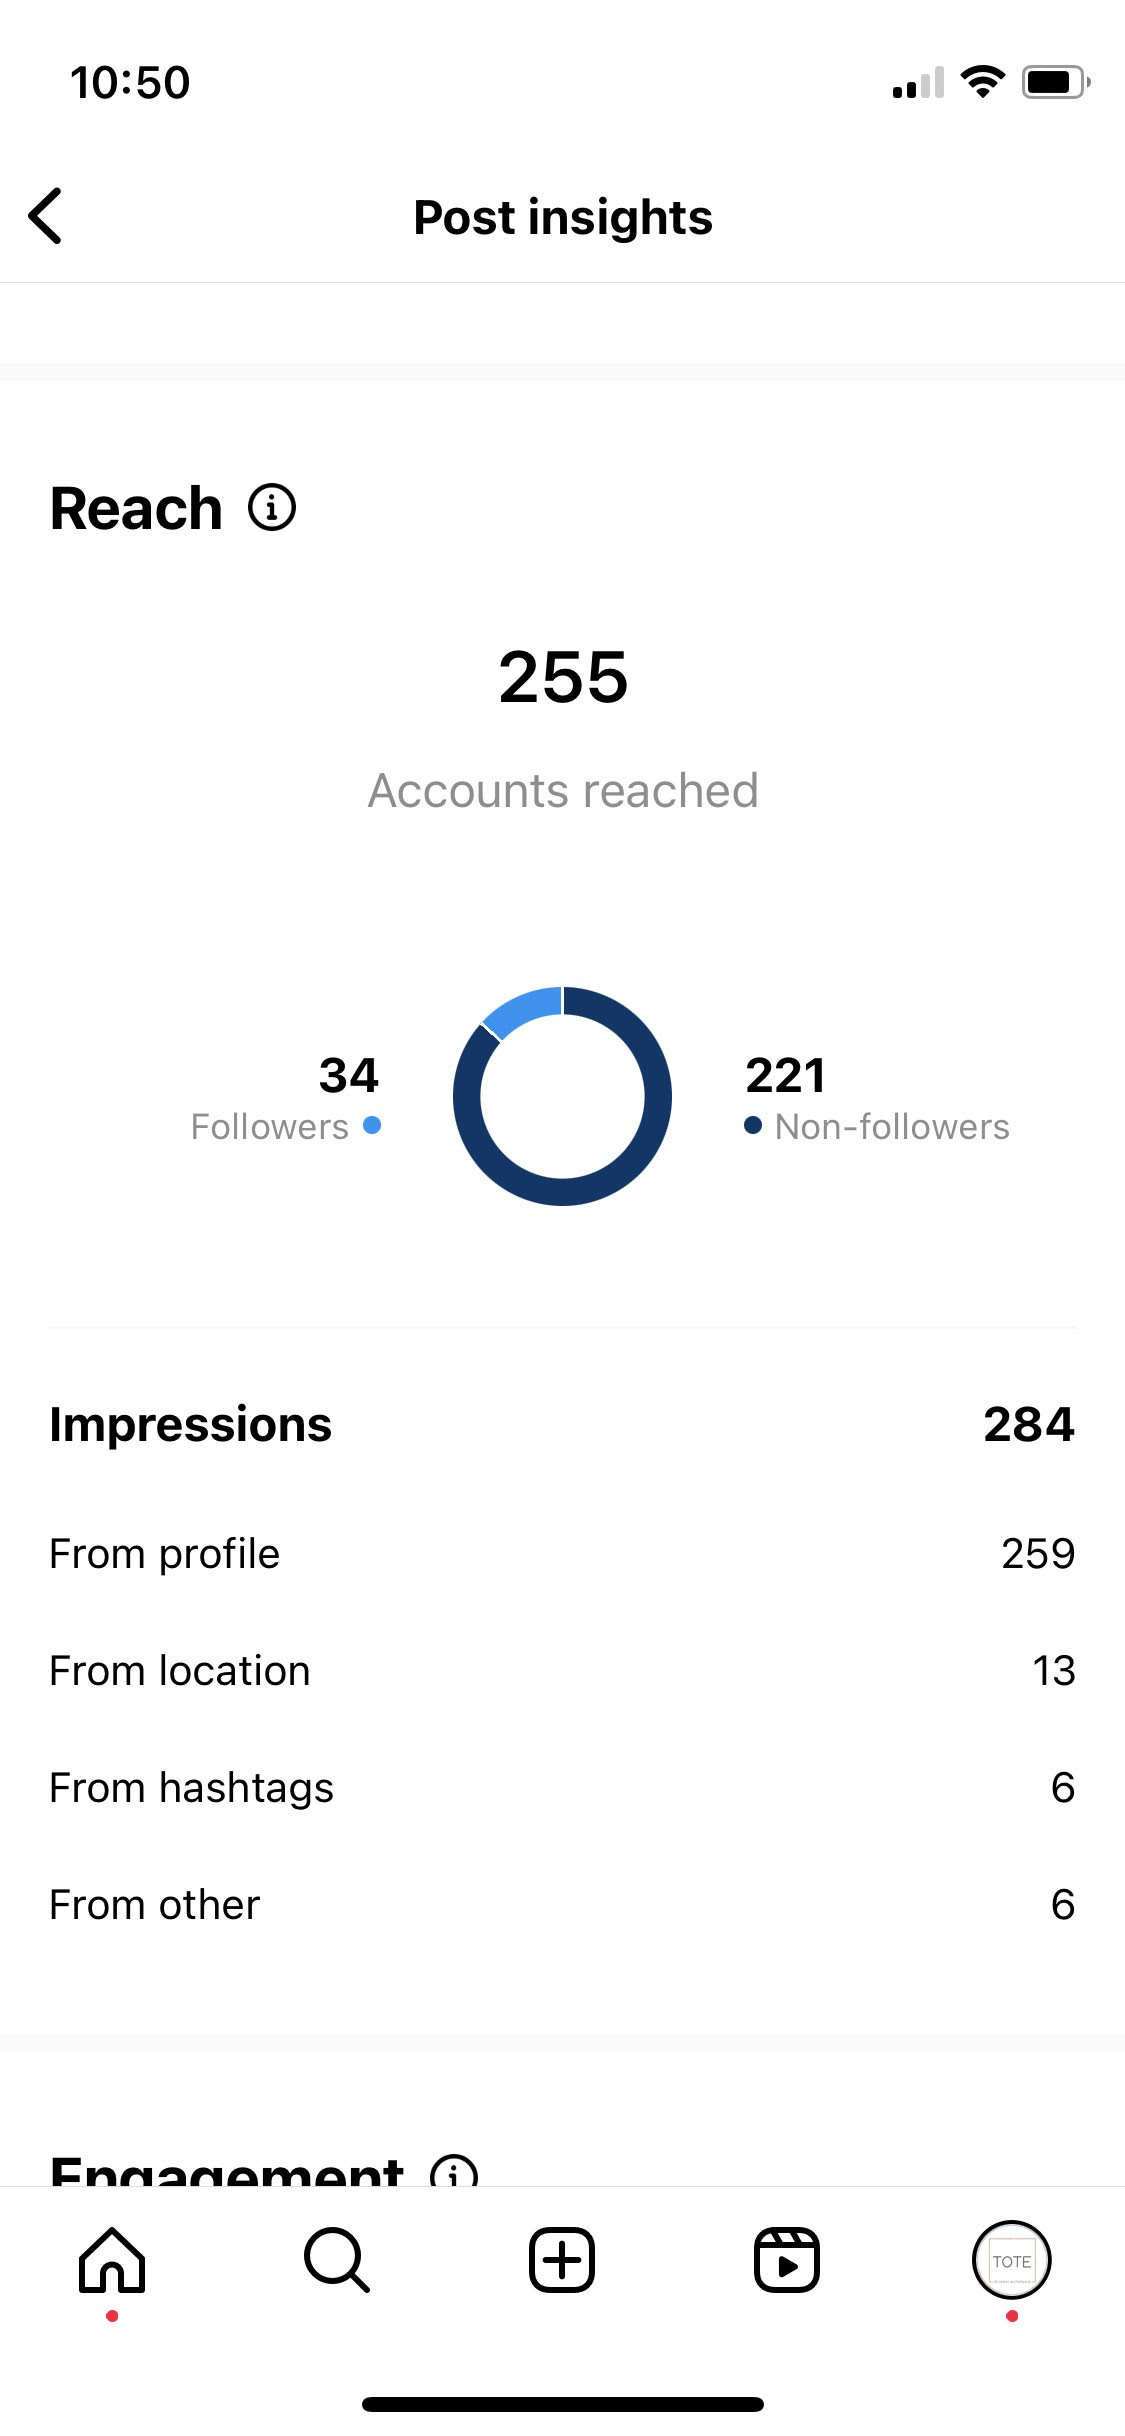 Reach of individual posts in Instagram Insights